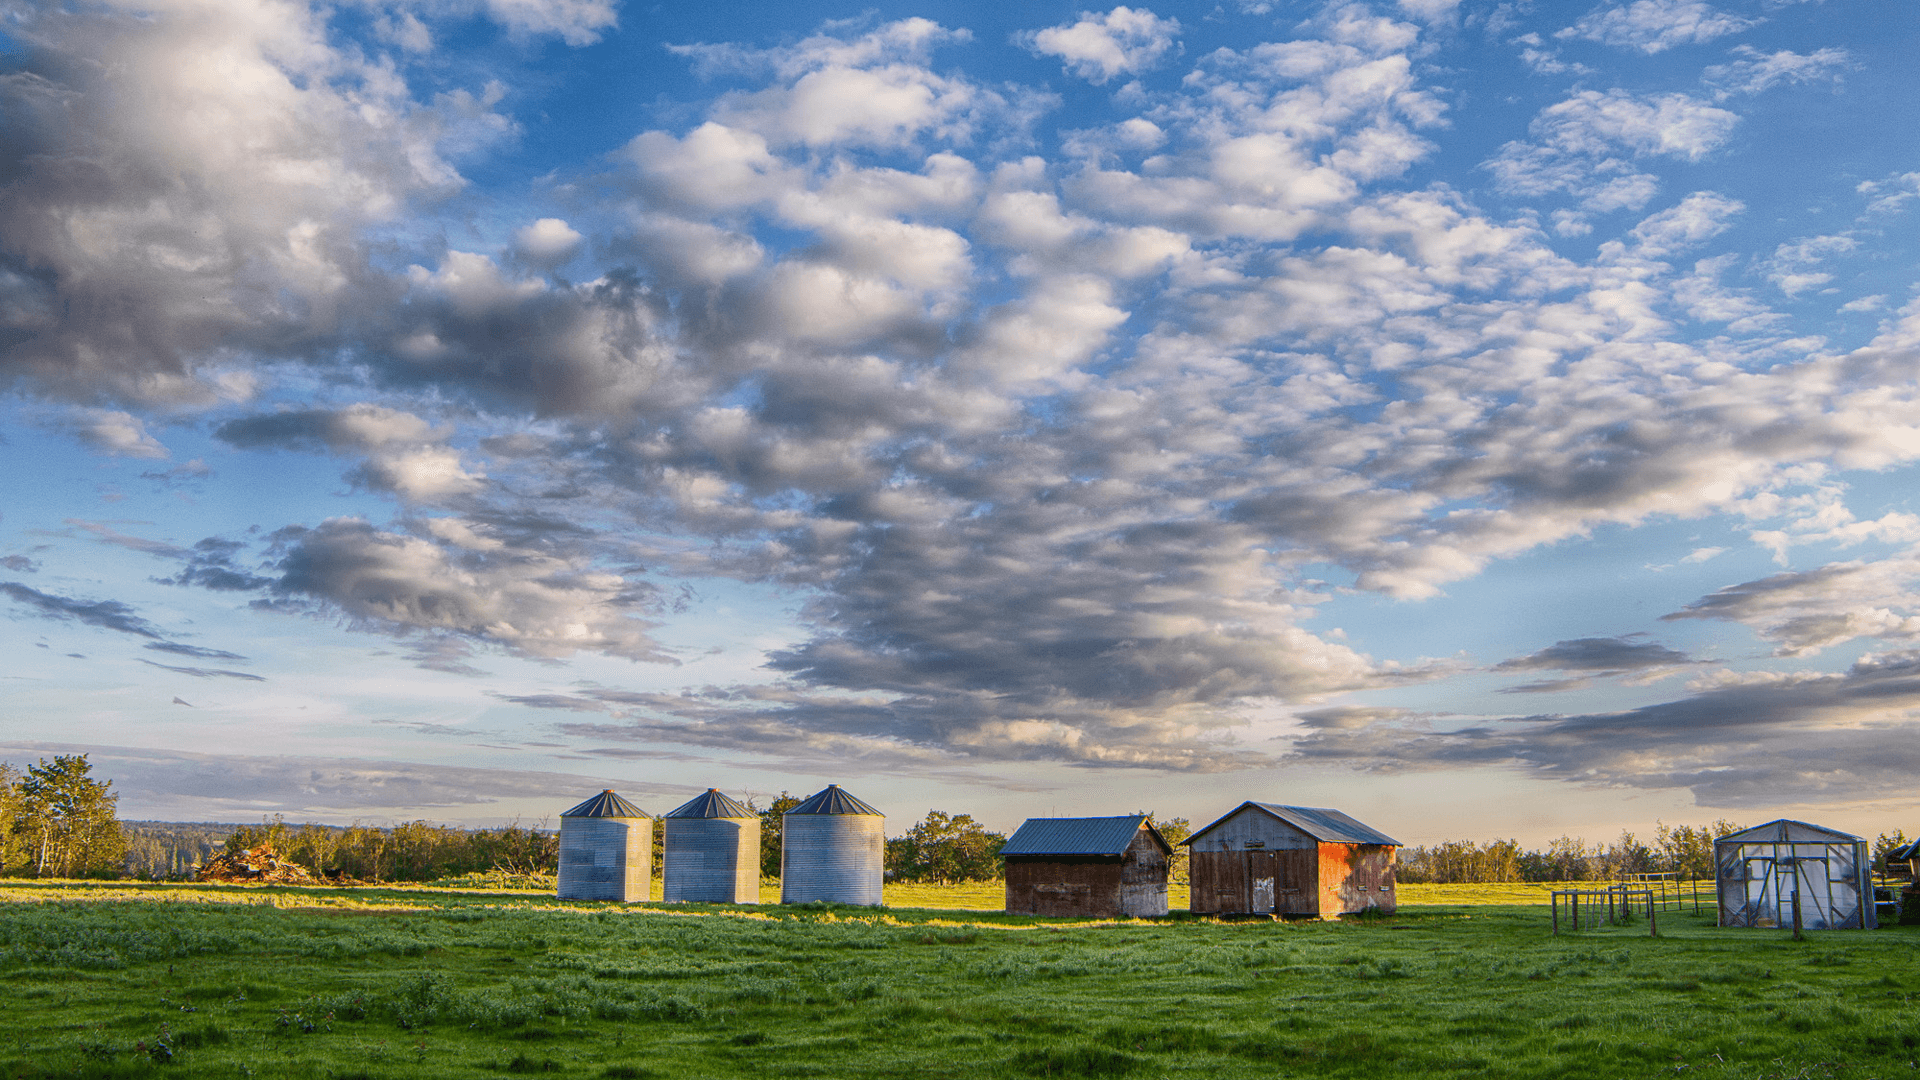 Farm in rural Alberta with grain bins and building, blue sky and clouds with green grass